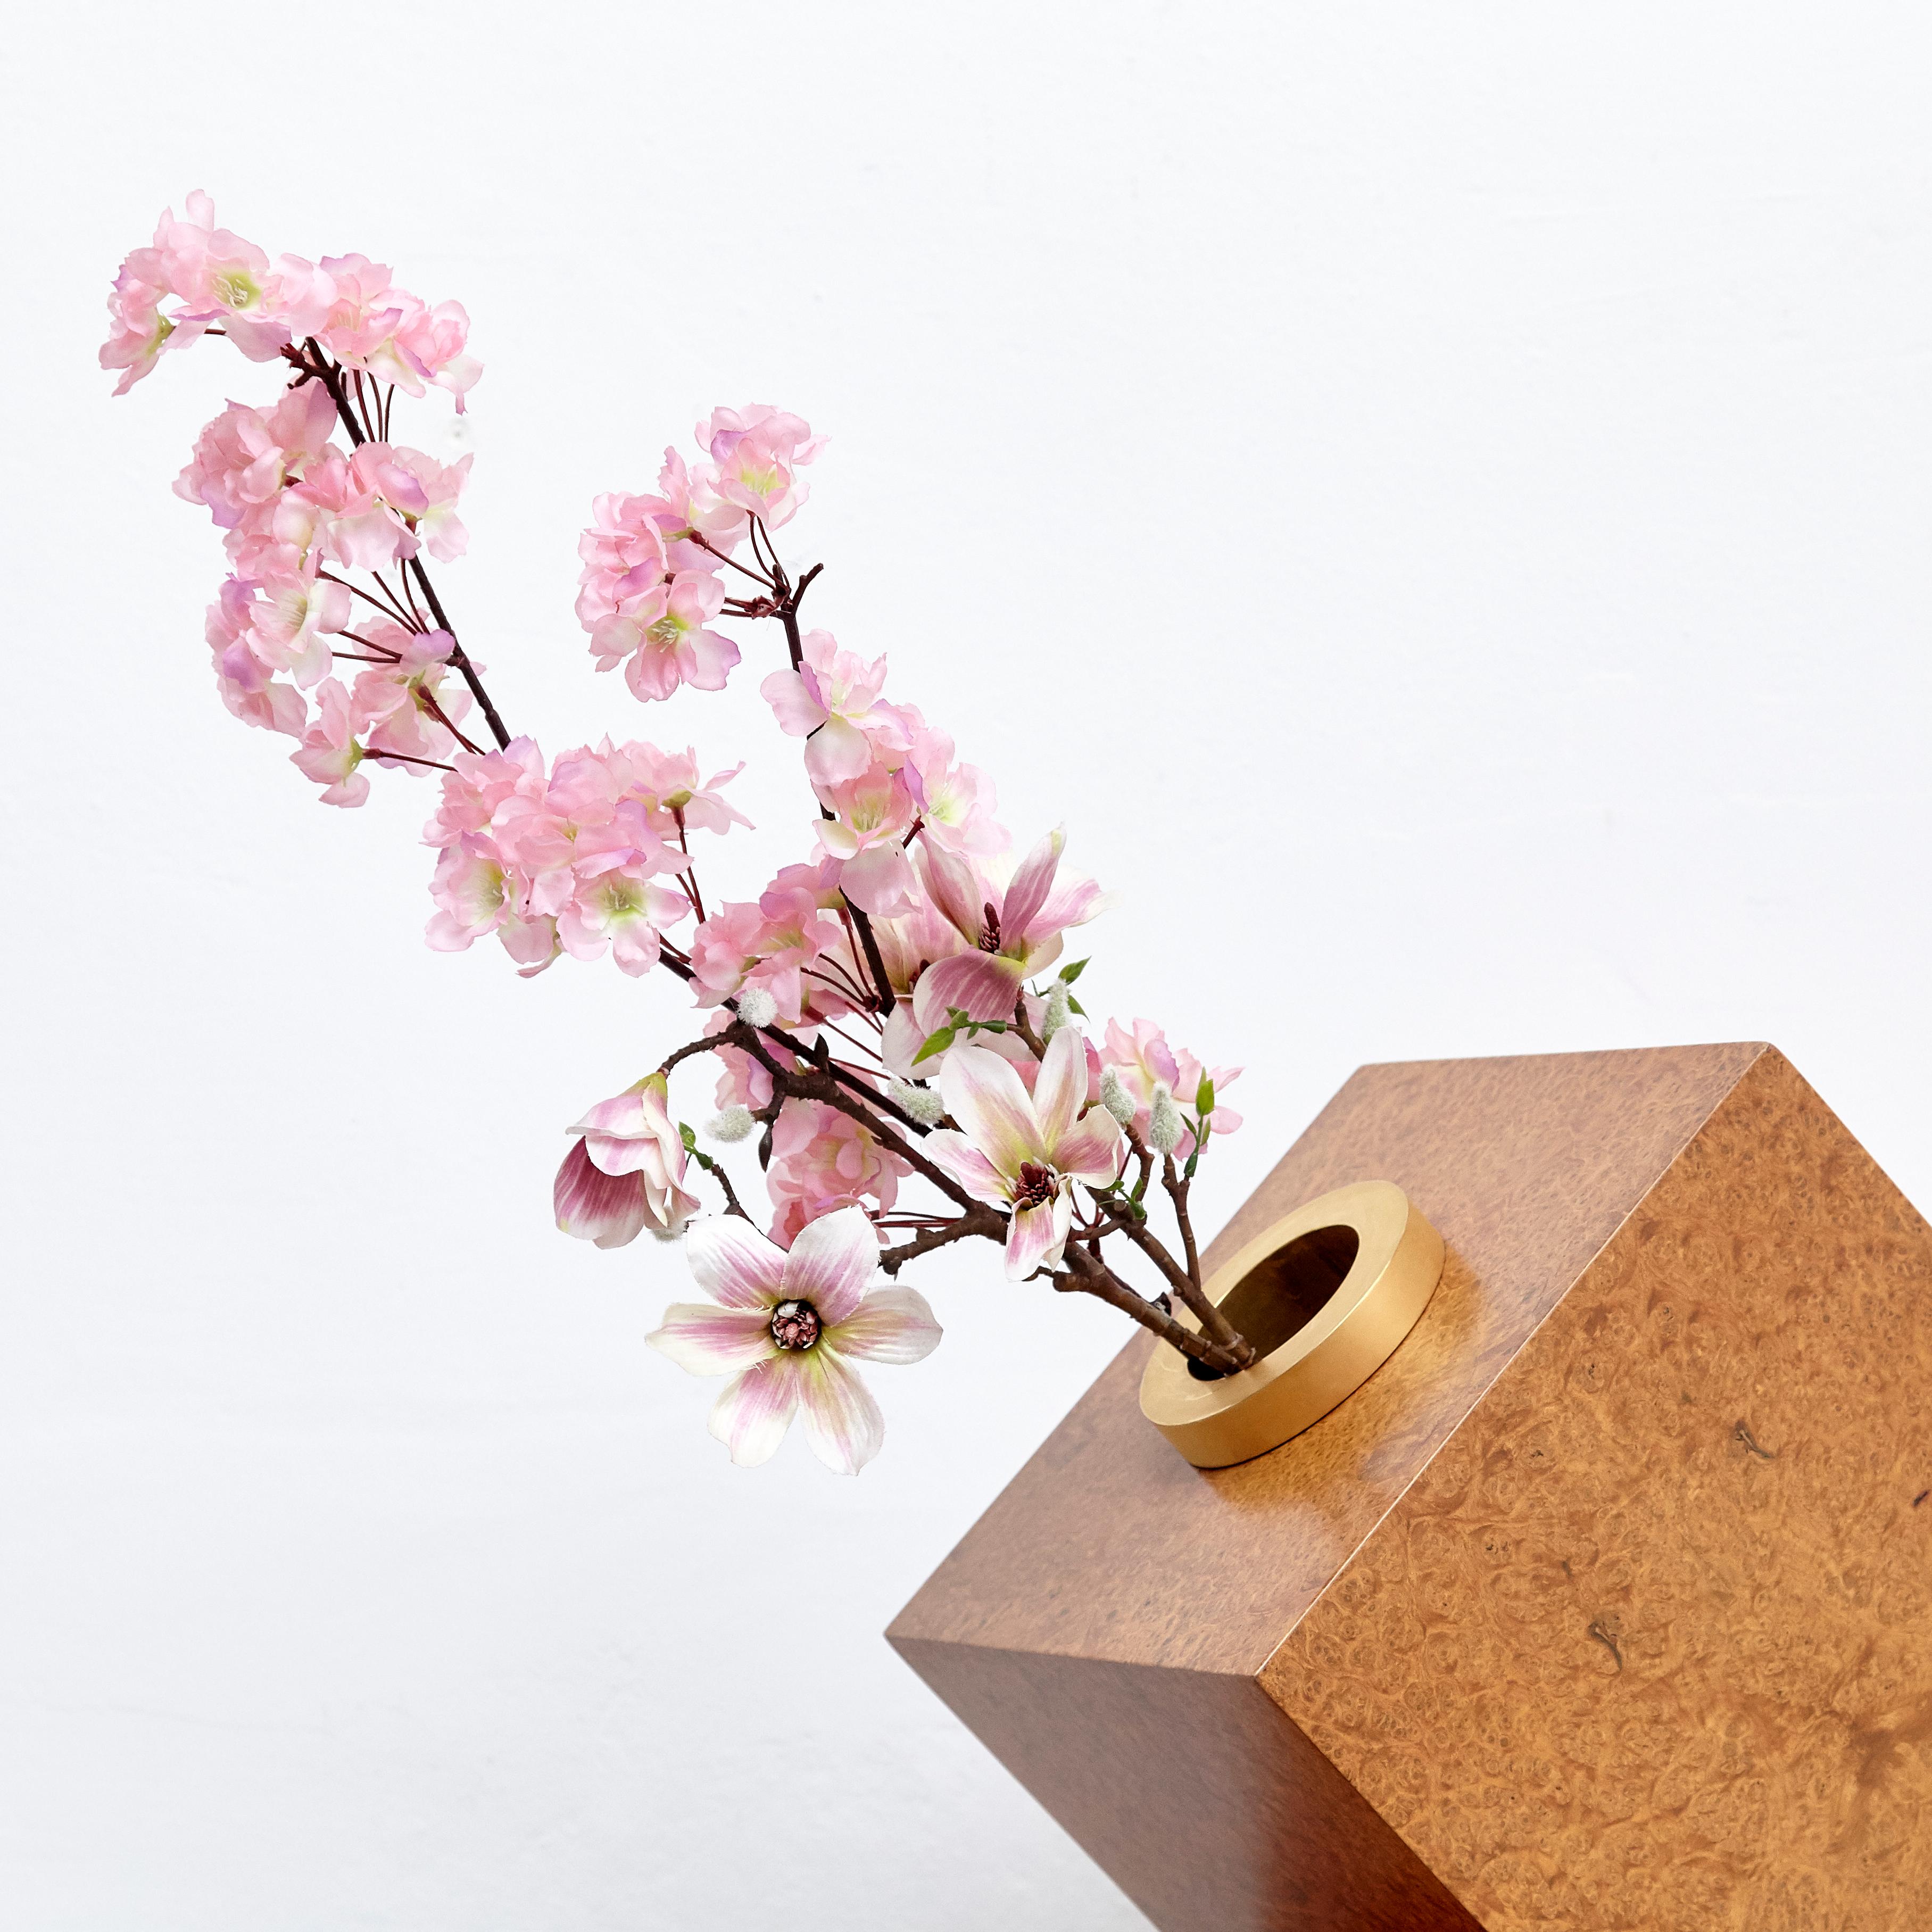 Brass Vase D by Ettore Sottsass 'Twenty-seven Woods for Chinese Artificial Flowers'